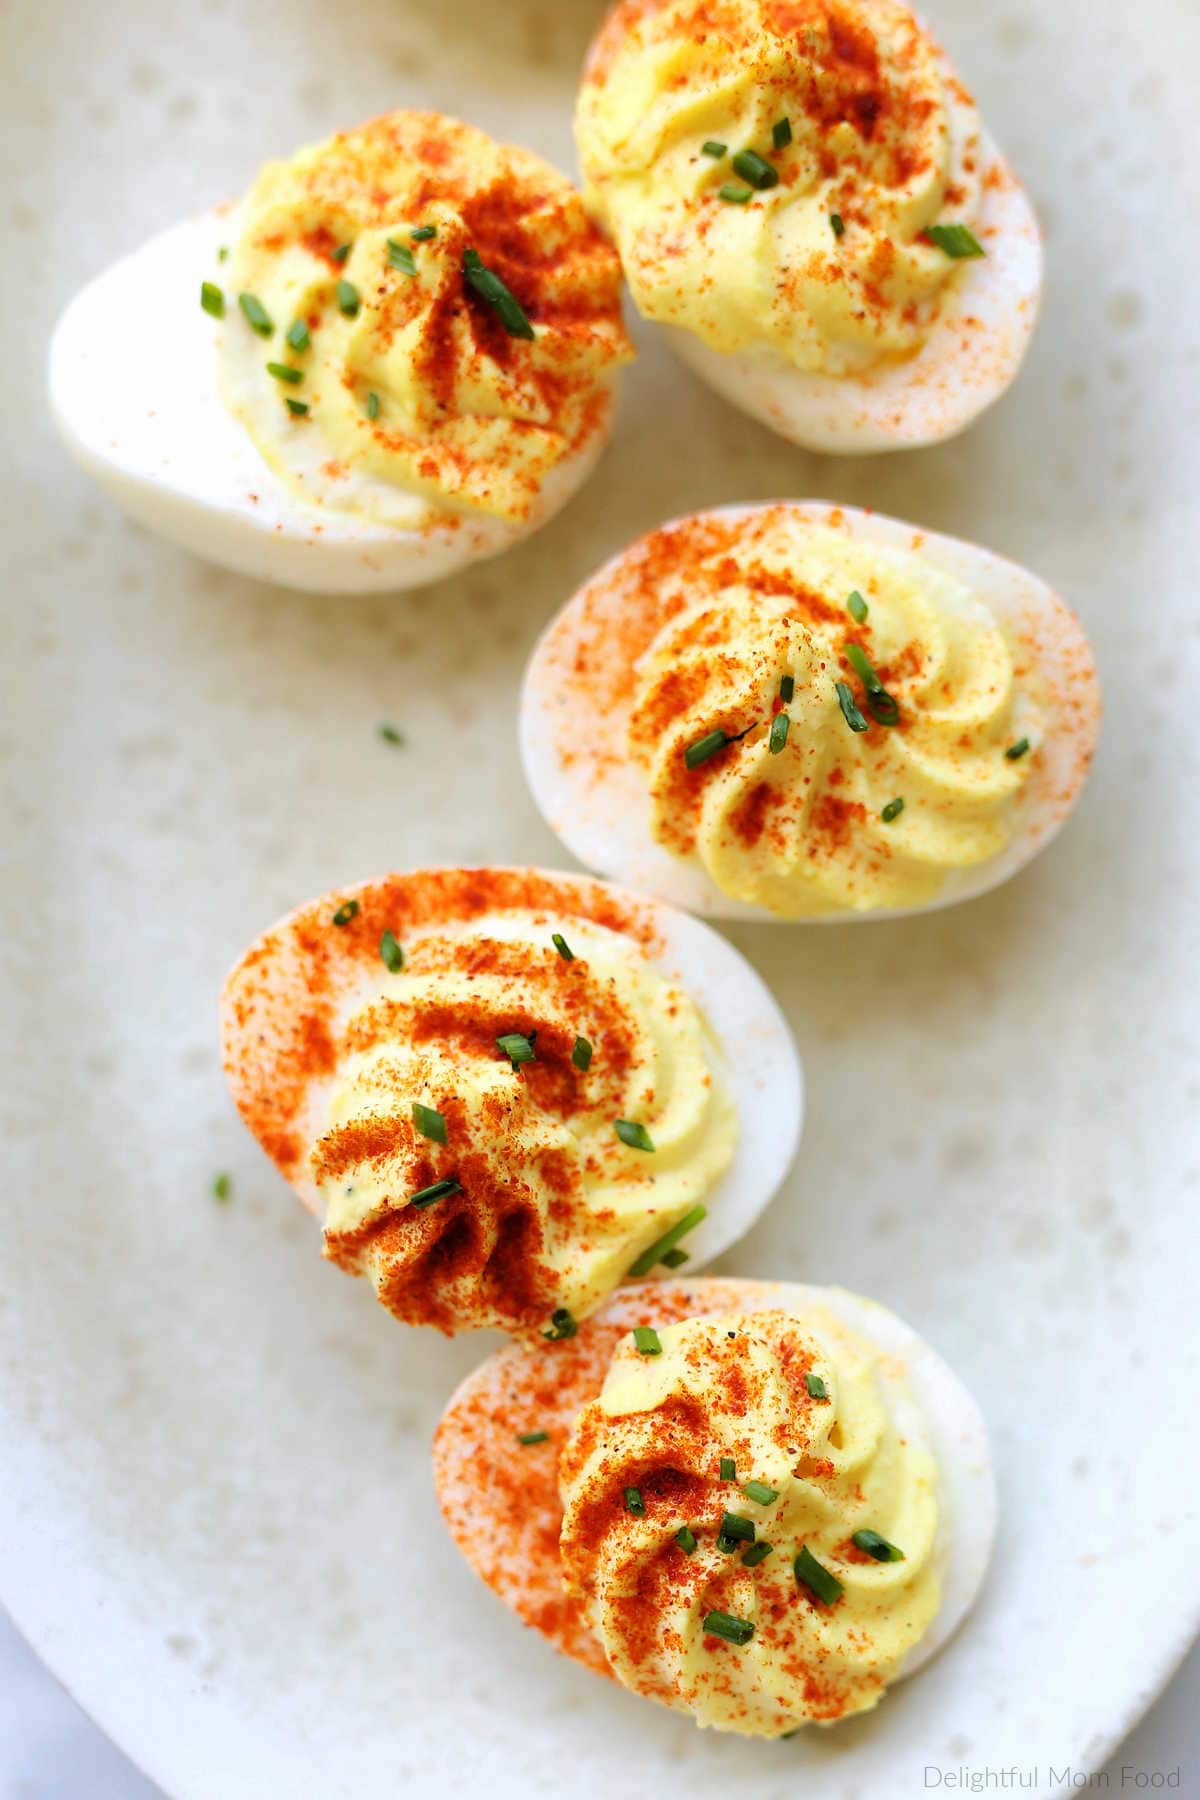 Deviled eggs topped with paprika and chives.